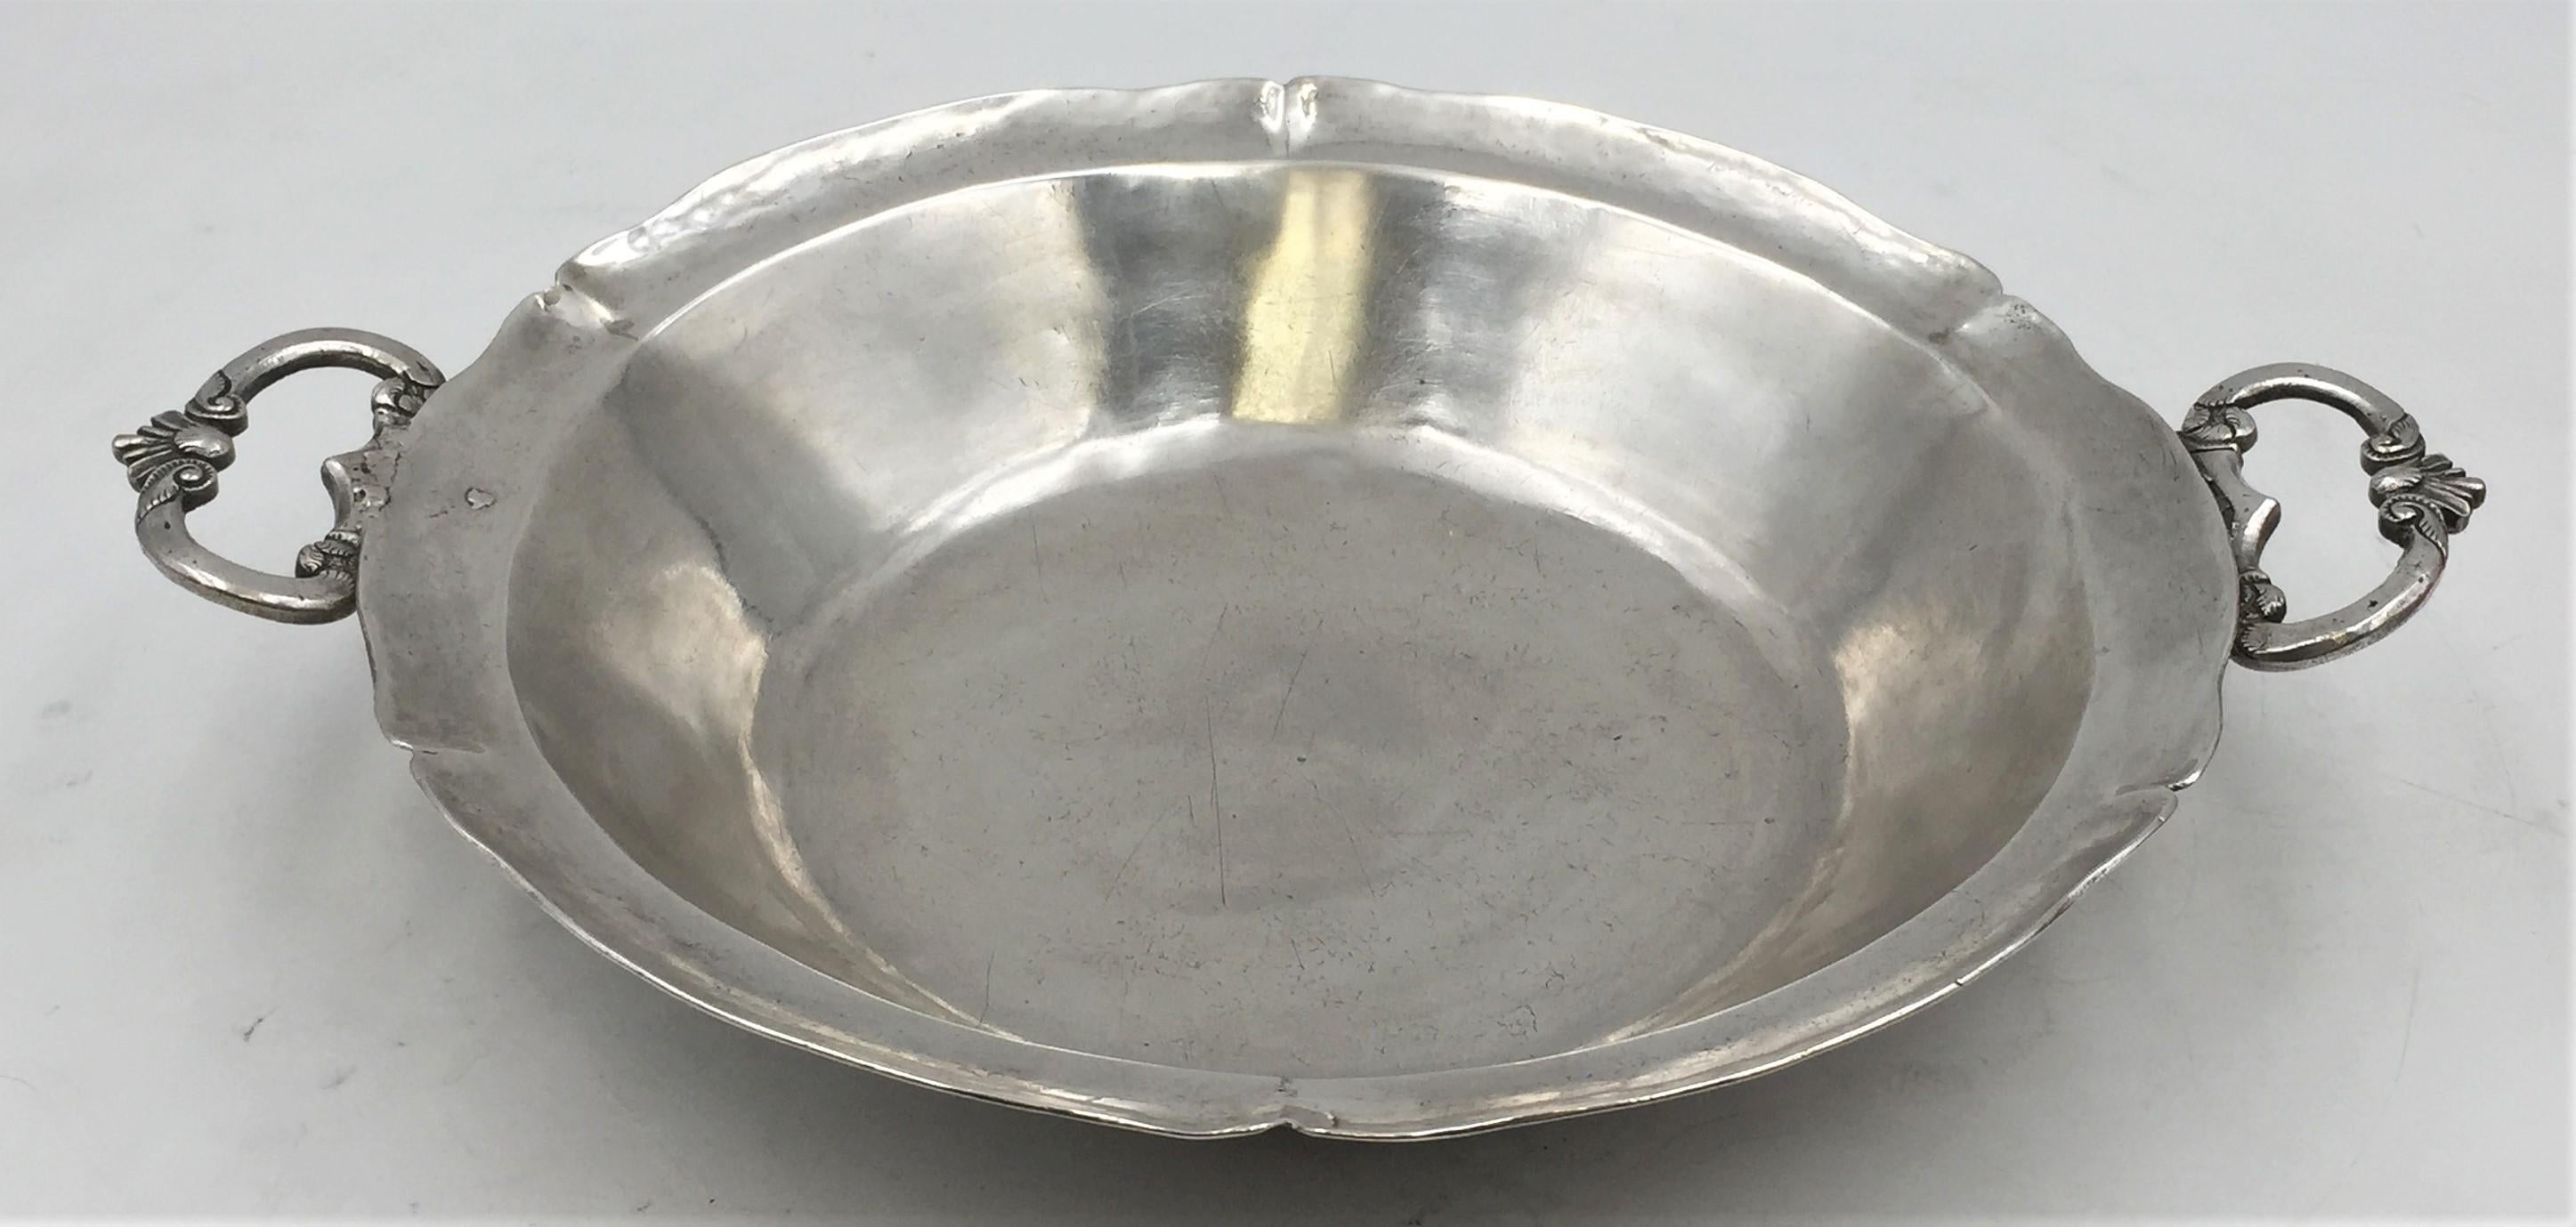 South American silver bowl from the 18th century, apparently unmarked, from the Colonial era, with ornate handles on either end and beautiful curved lines around the rim. It measures 11'' from handle to handle by 1 3/4'' in height, and weighs 14.7